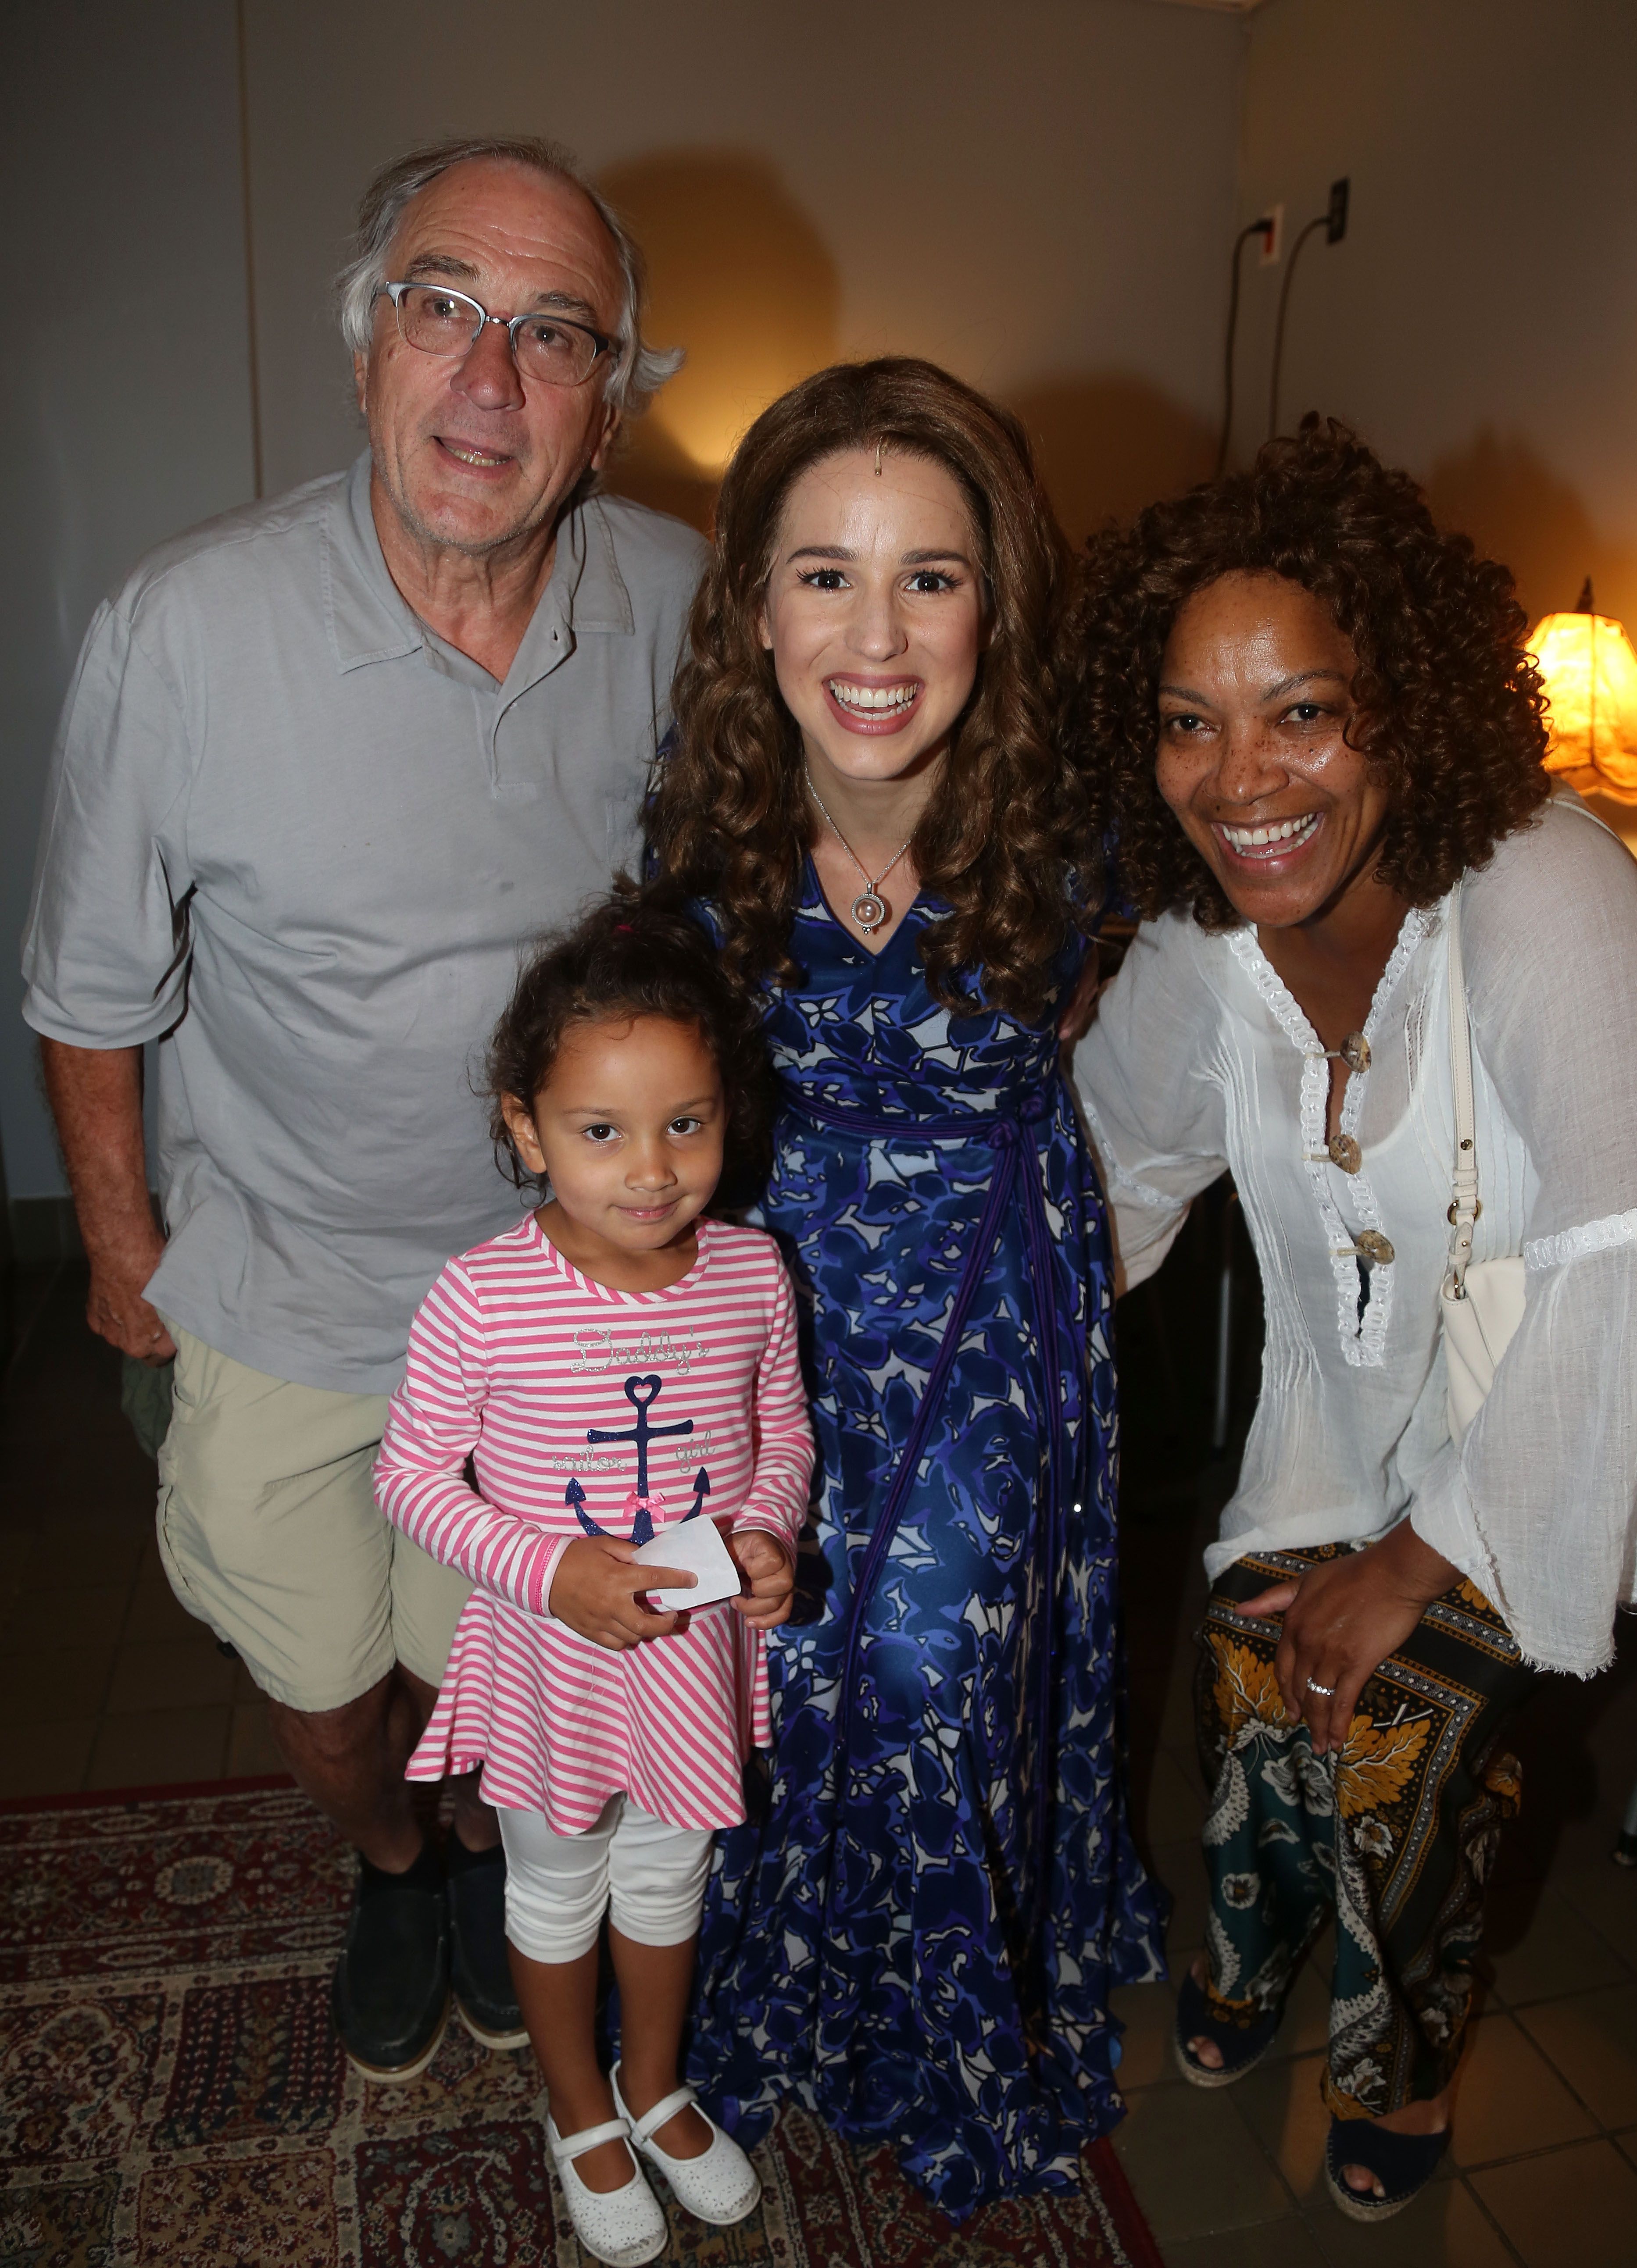 Robert De Niro, daughter Helen Grace, Chilina Kennedy as "Carole King" and Grace Hightower De Niro pose backstage at the hit Carole King musical "Beautiful" on Broadway at The Stephen Sondheim Theater on September 2, 2015 in New York City | Source: Getty Images